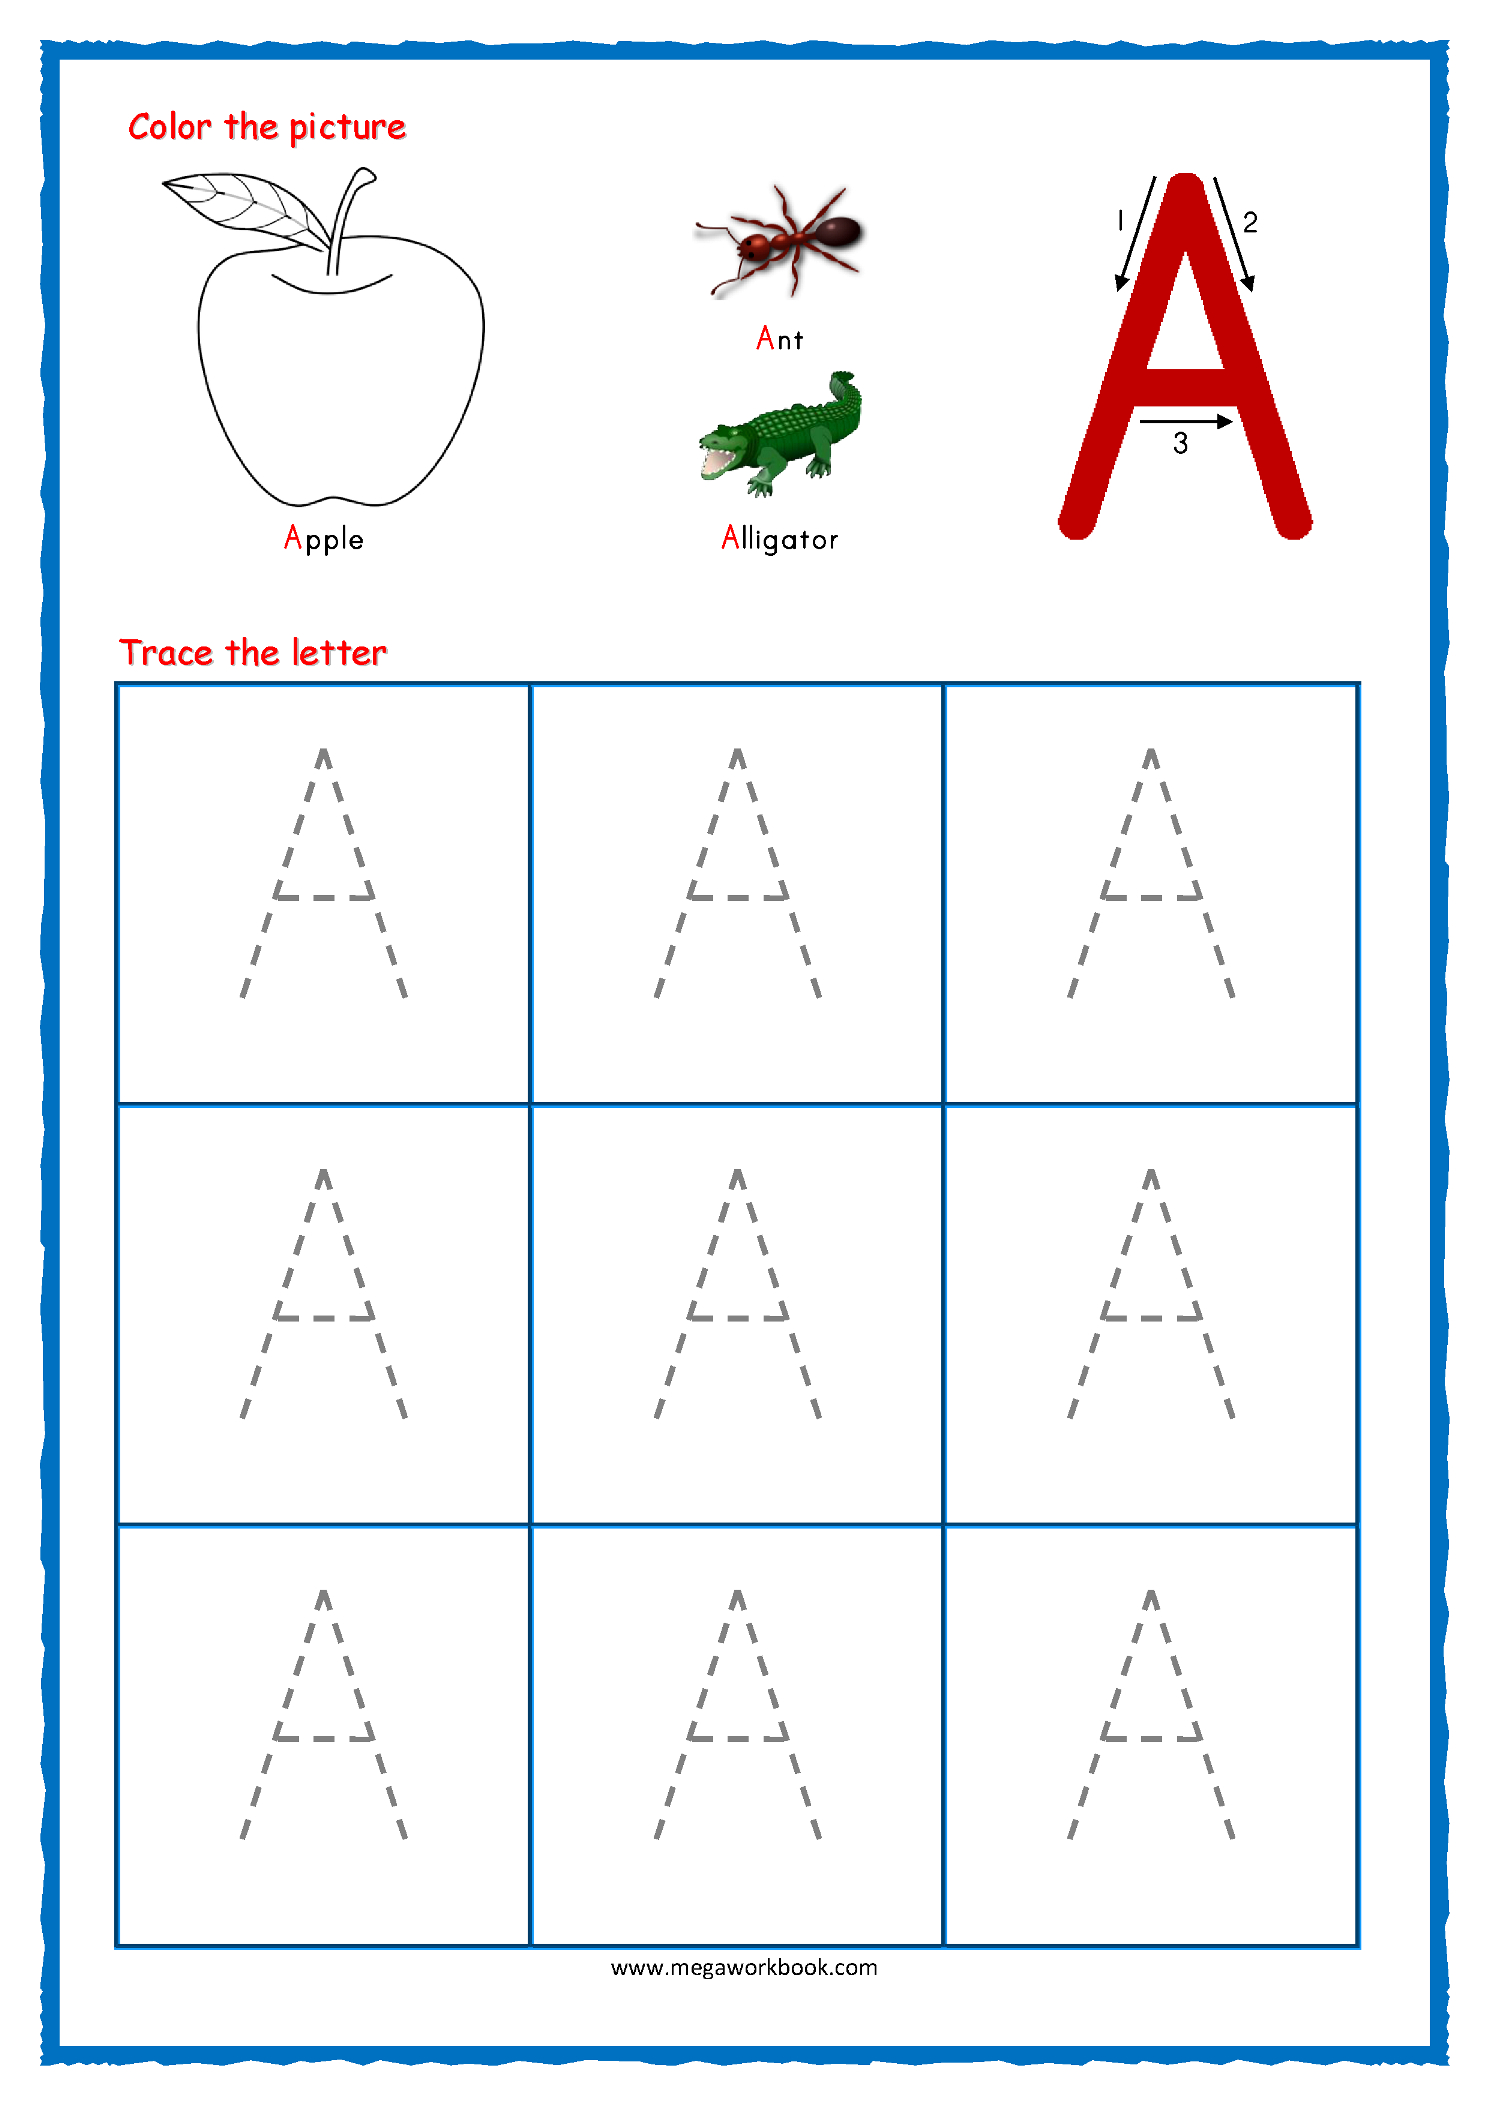 Coloring Book : Coloring Book Alphabet Tracing Worksheets for Tracing Letters Worksheets Printable